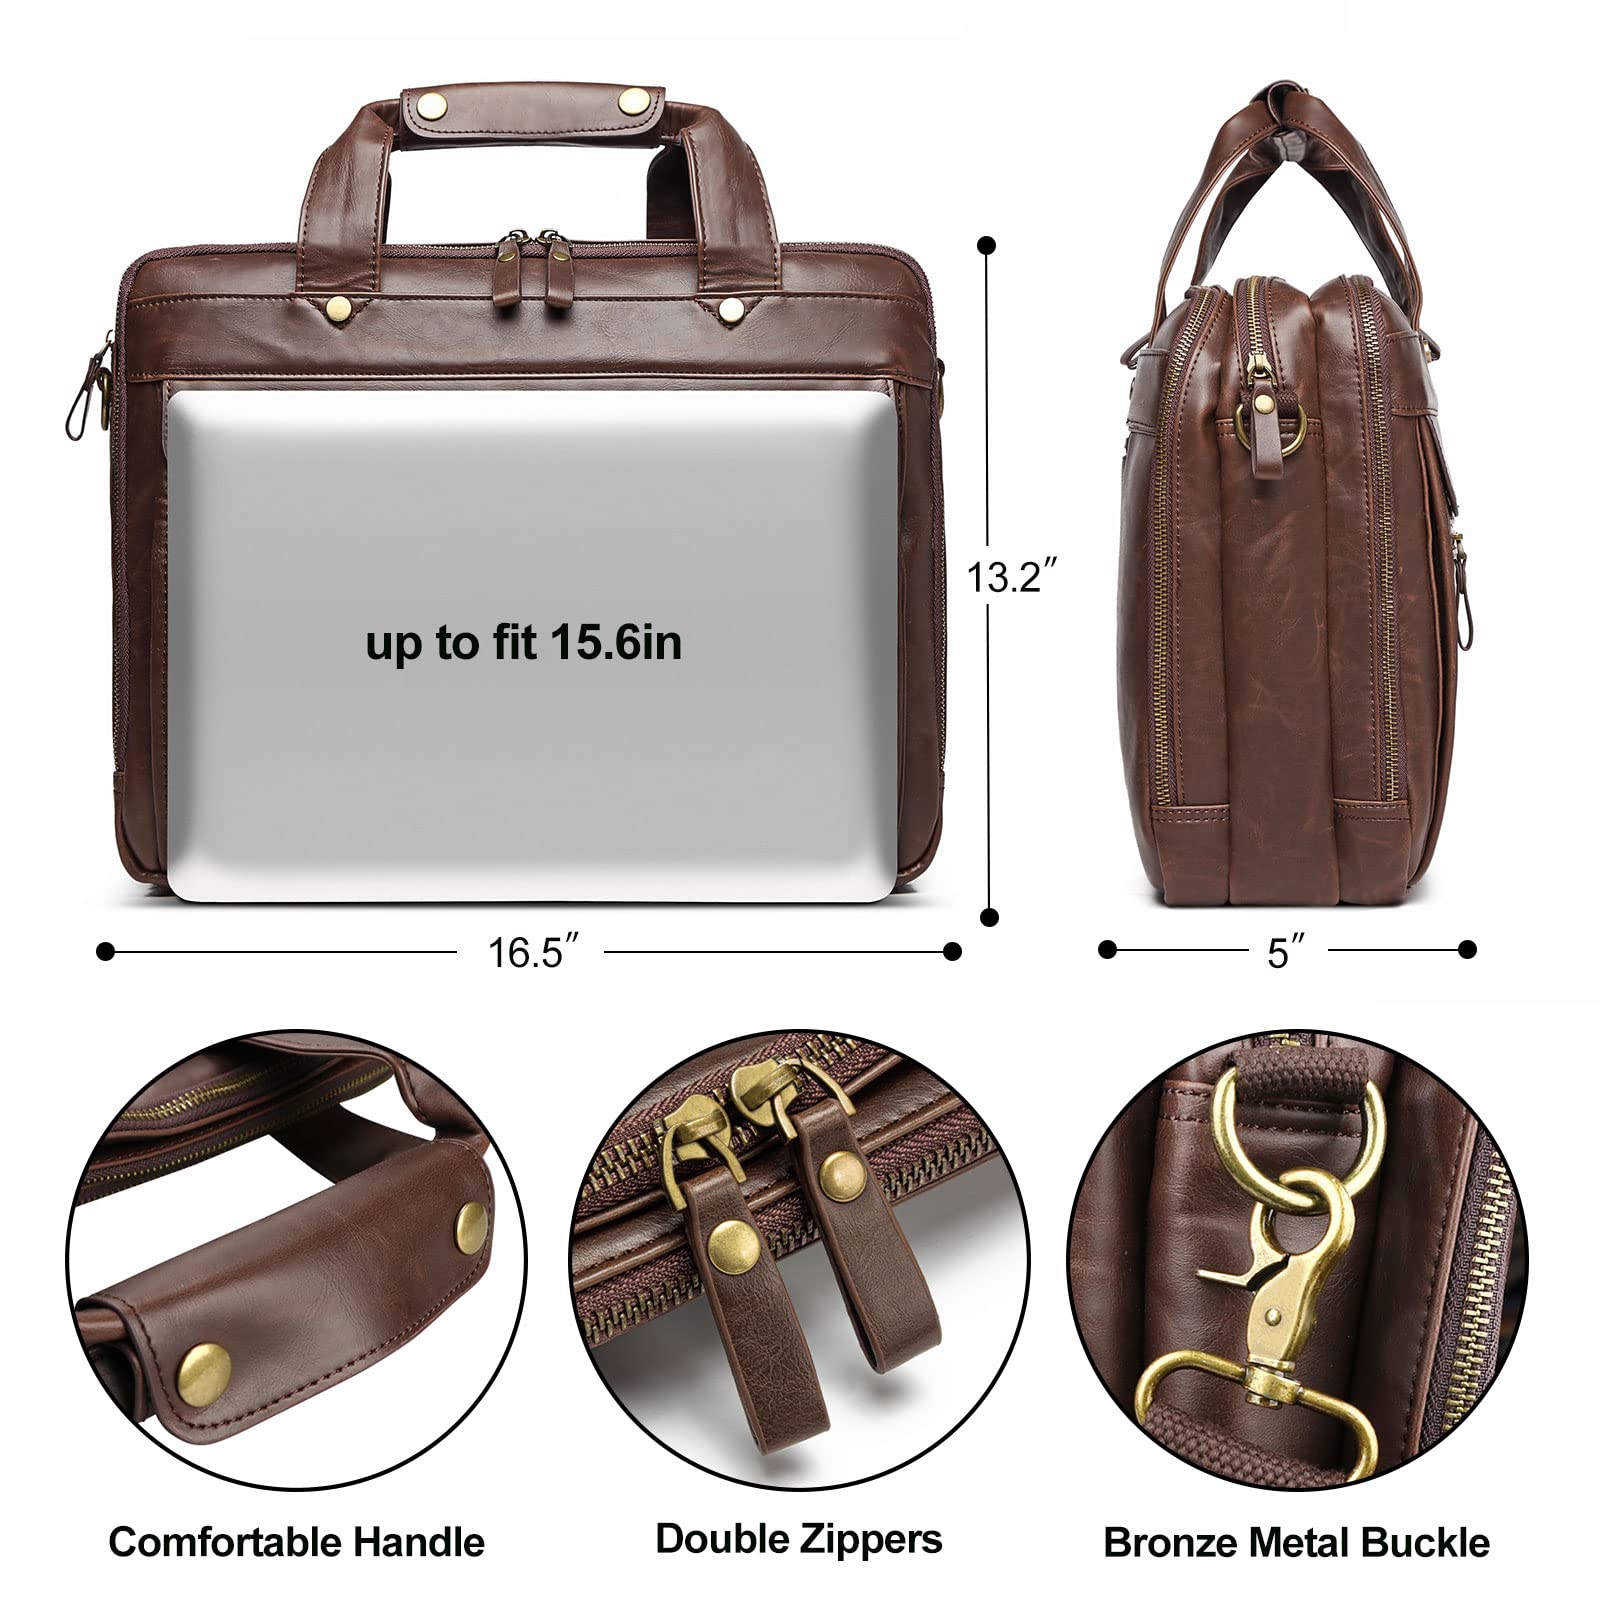 PU Leather Briefcases for Men Computer Bag Laptop Bag Waterproof Retro Business Travel Messenger Bag for Men Large 15.6 Inch, Perfect for Daily Use/Christmas (Brown)